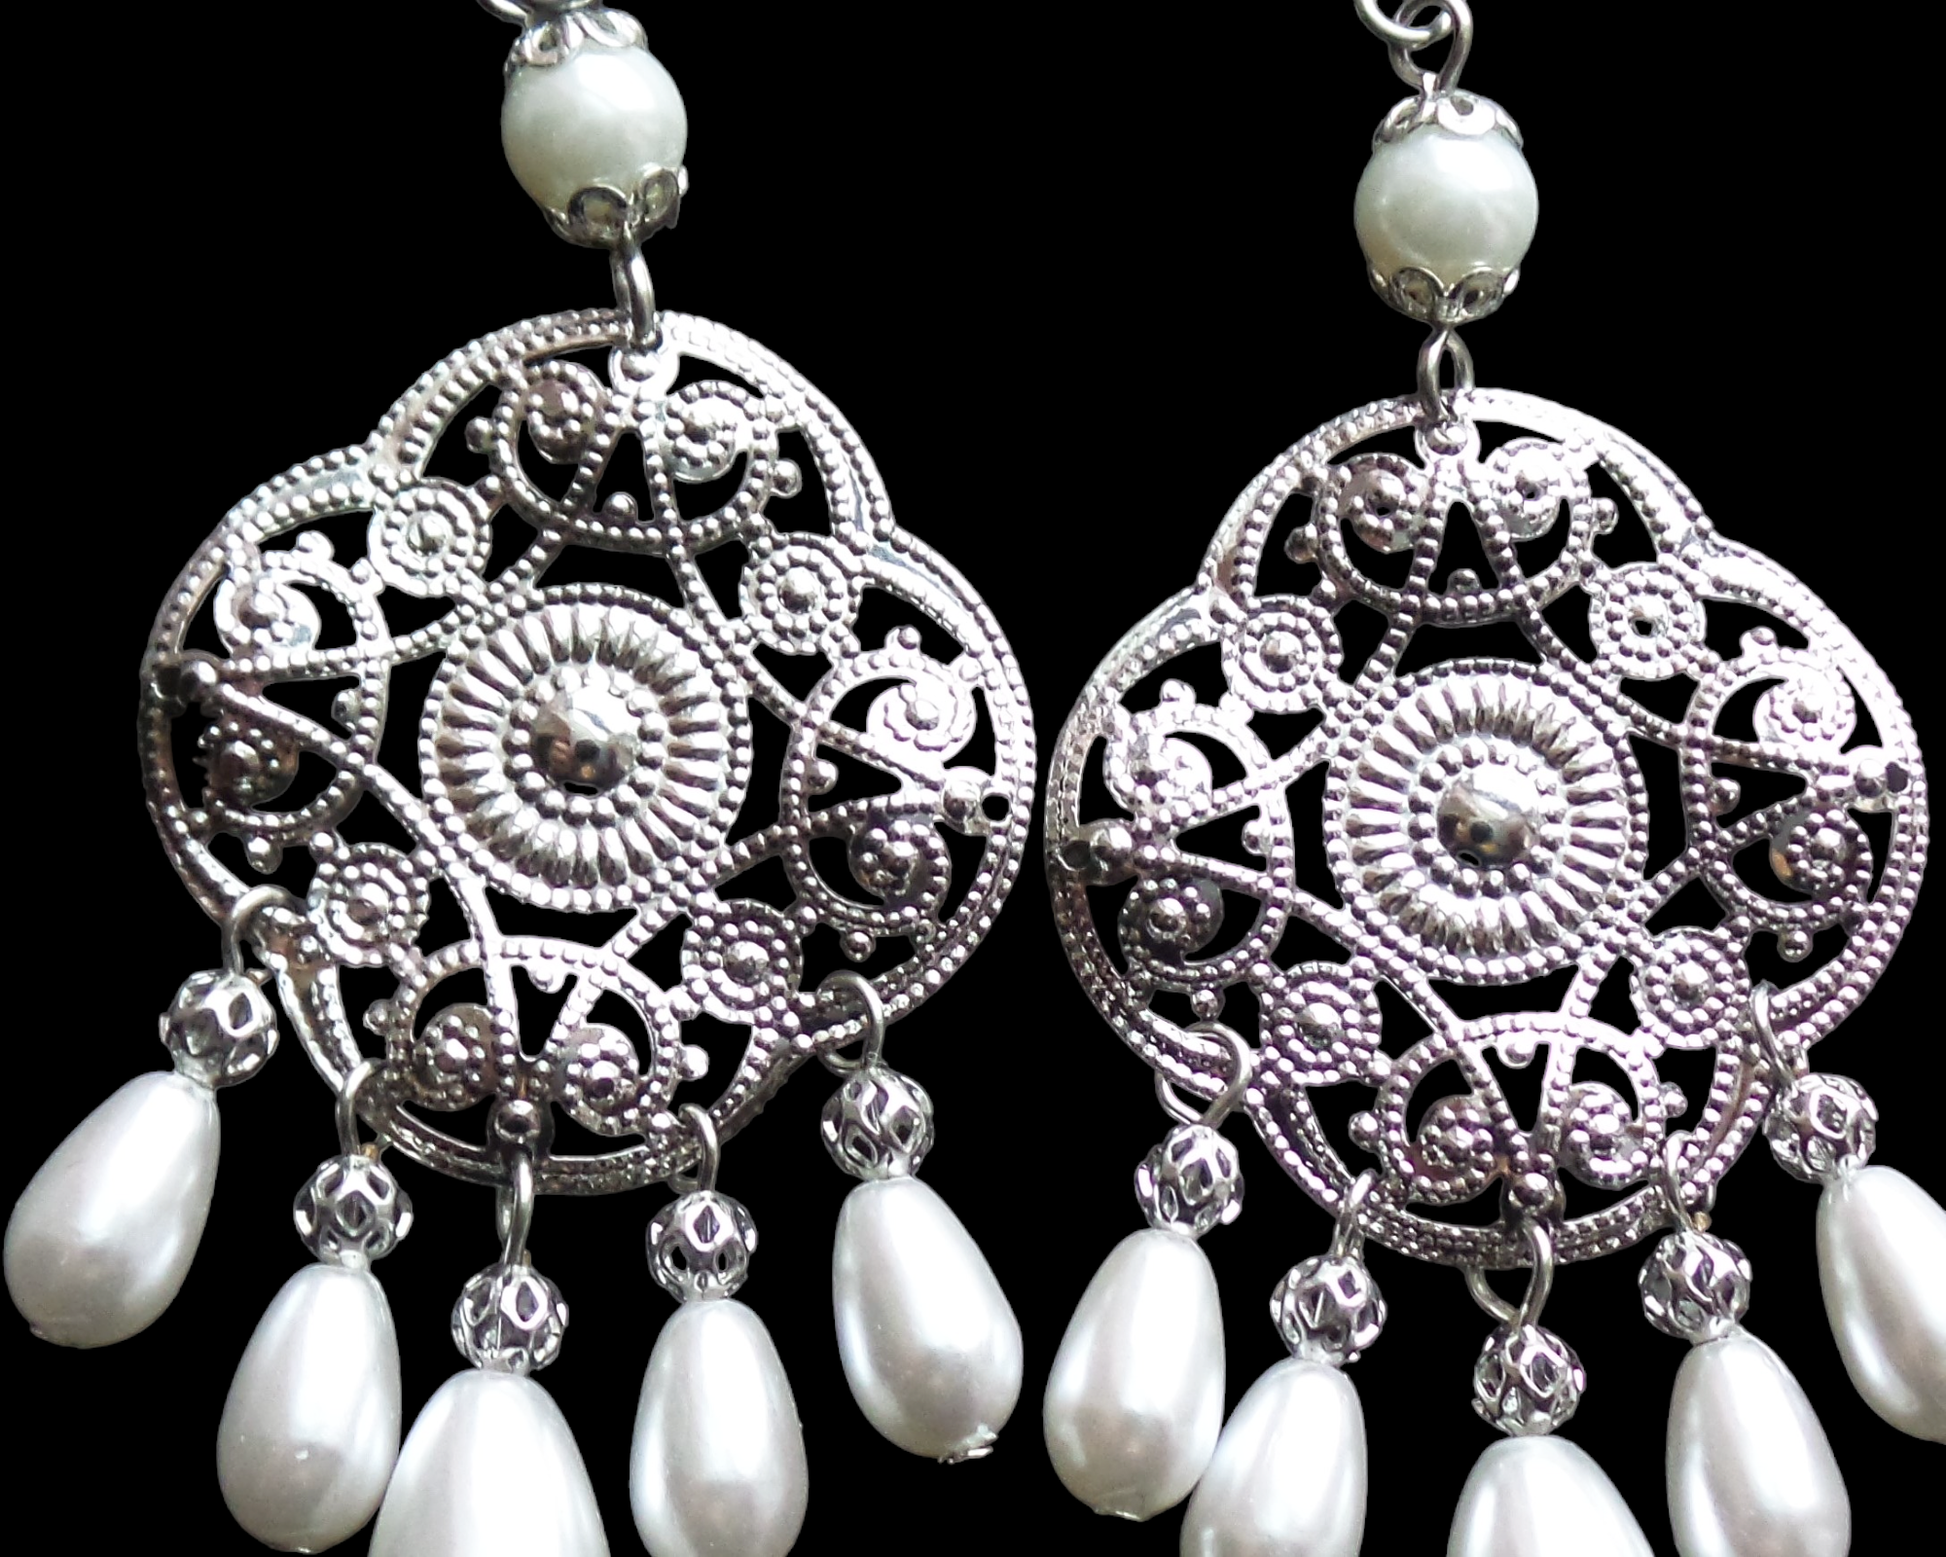 Extra Long Art Deco Style Pearl Chandelier Earrings with silver tone, white gold color metal and white drop shaped pearls, displayed on black background